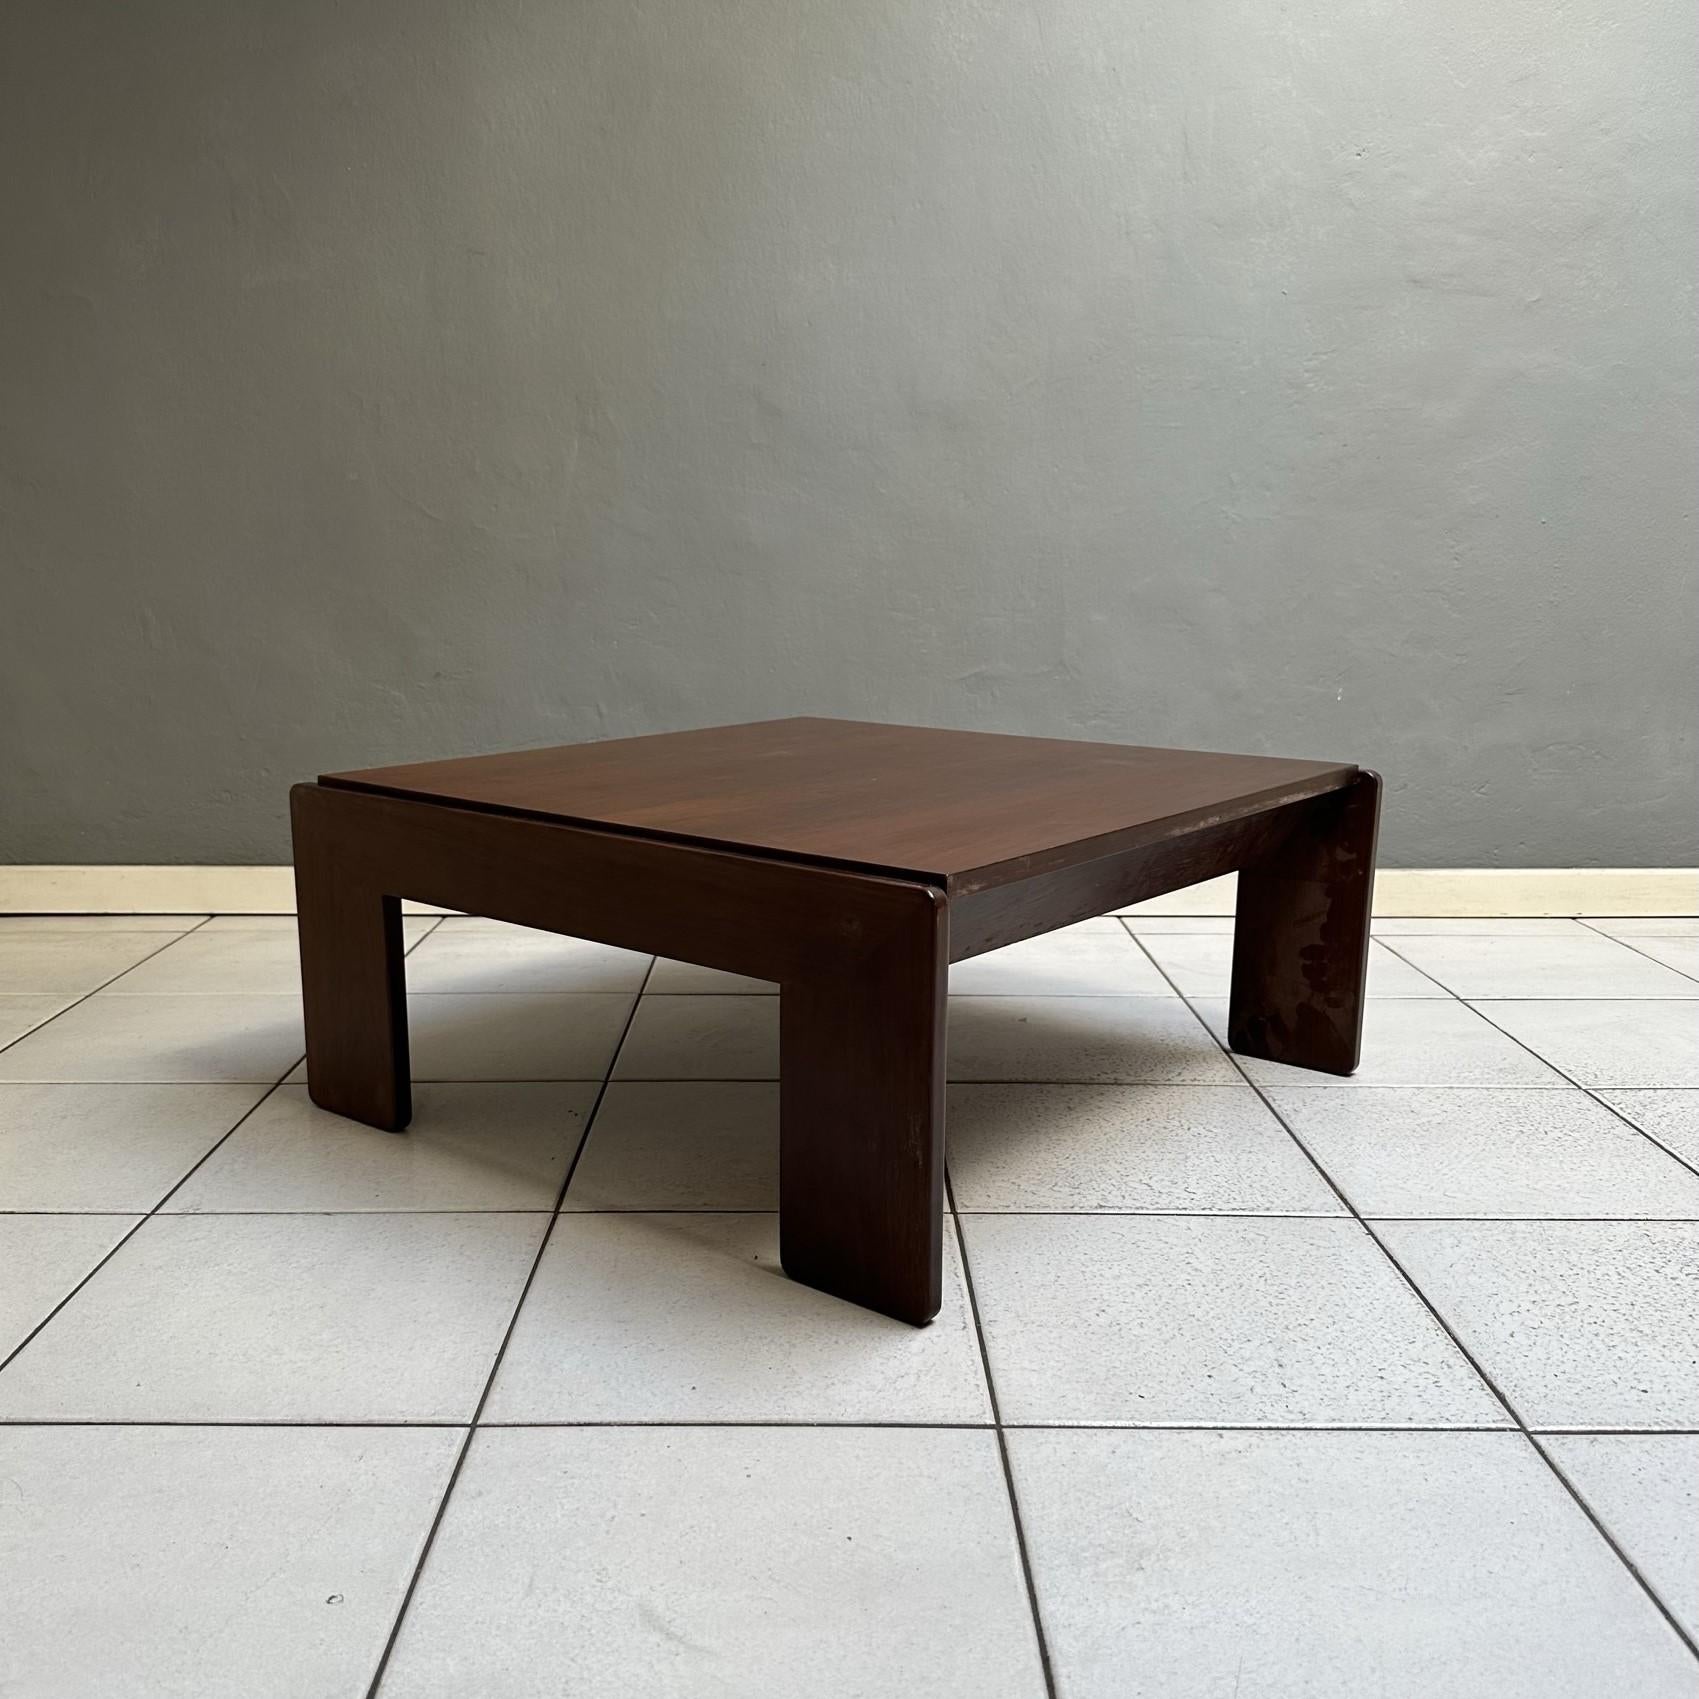 Seventies coffee table, design by Tobia & Afra Scarpa for Gavina.
It is one of the first tables produced in the Bastiano series.
coffee table in  dark brown wood.
The top is removable.
On the structure you can see the authenticity mark.
Very good